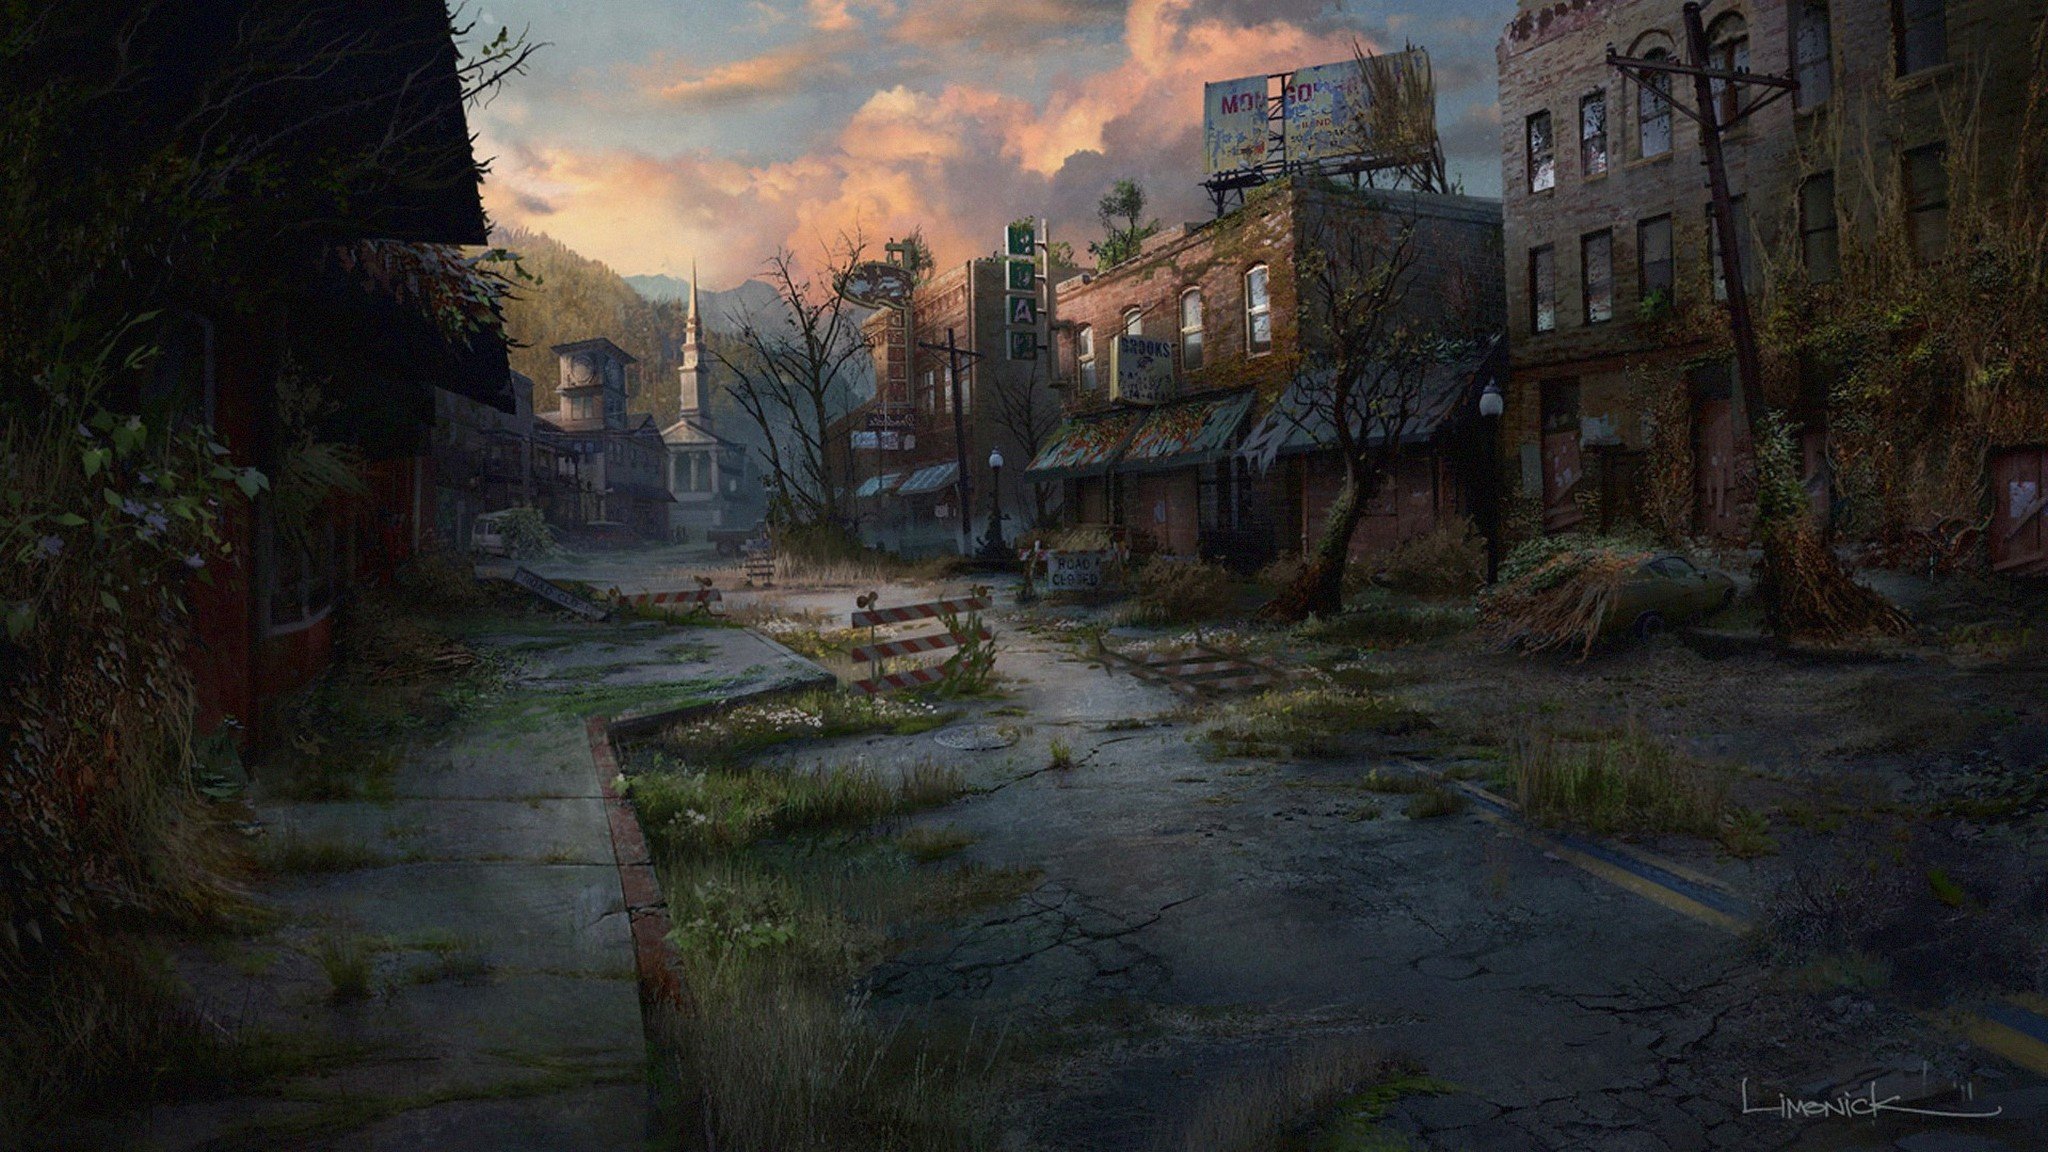 Town of us 3 3 1. The last of us 2 город. Заброшенный город the last of us 2. Постапокалипсис the last of us. The last of us постапокалиптические Art.